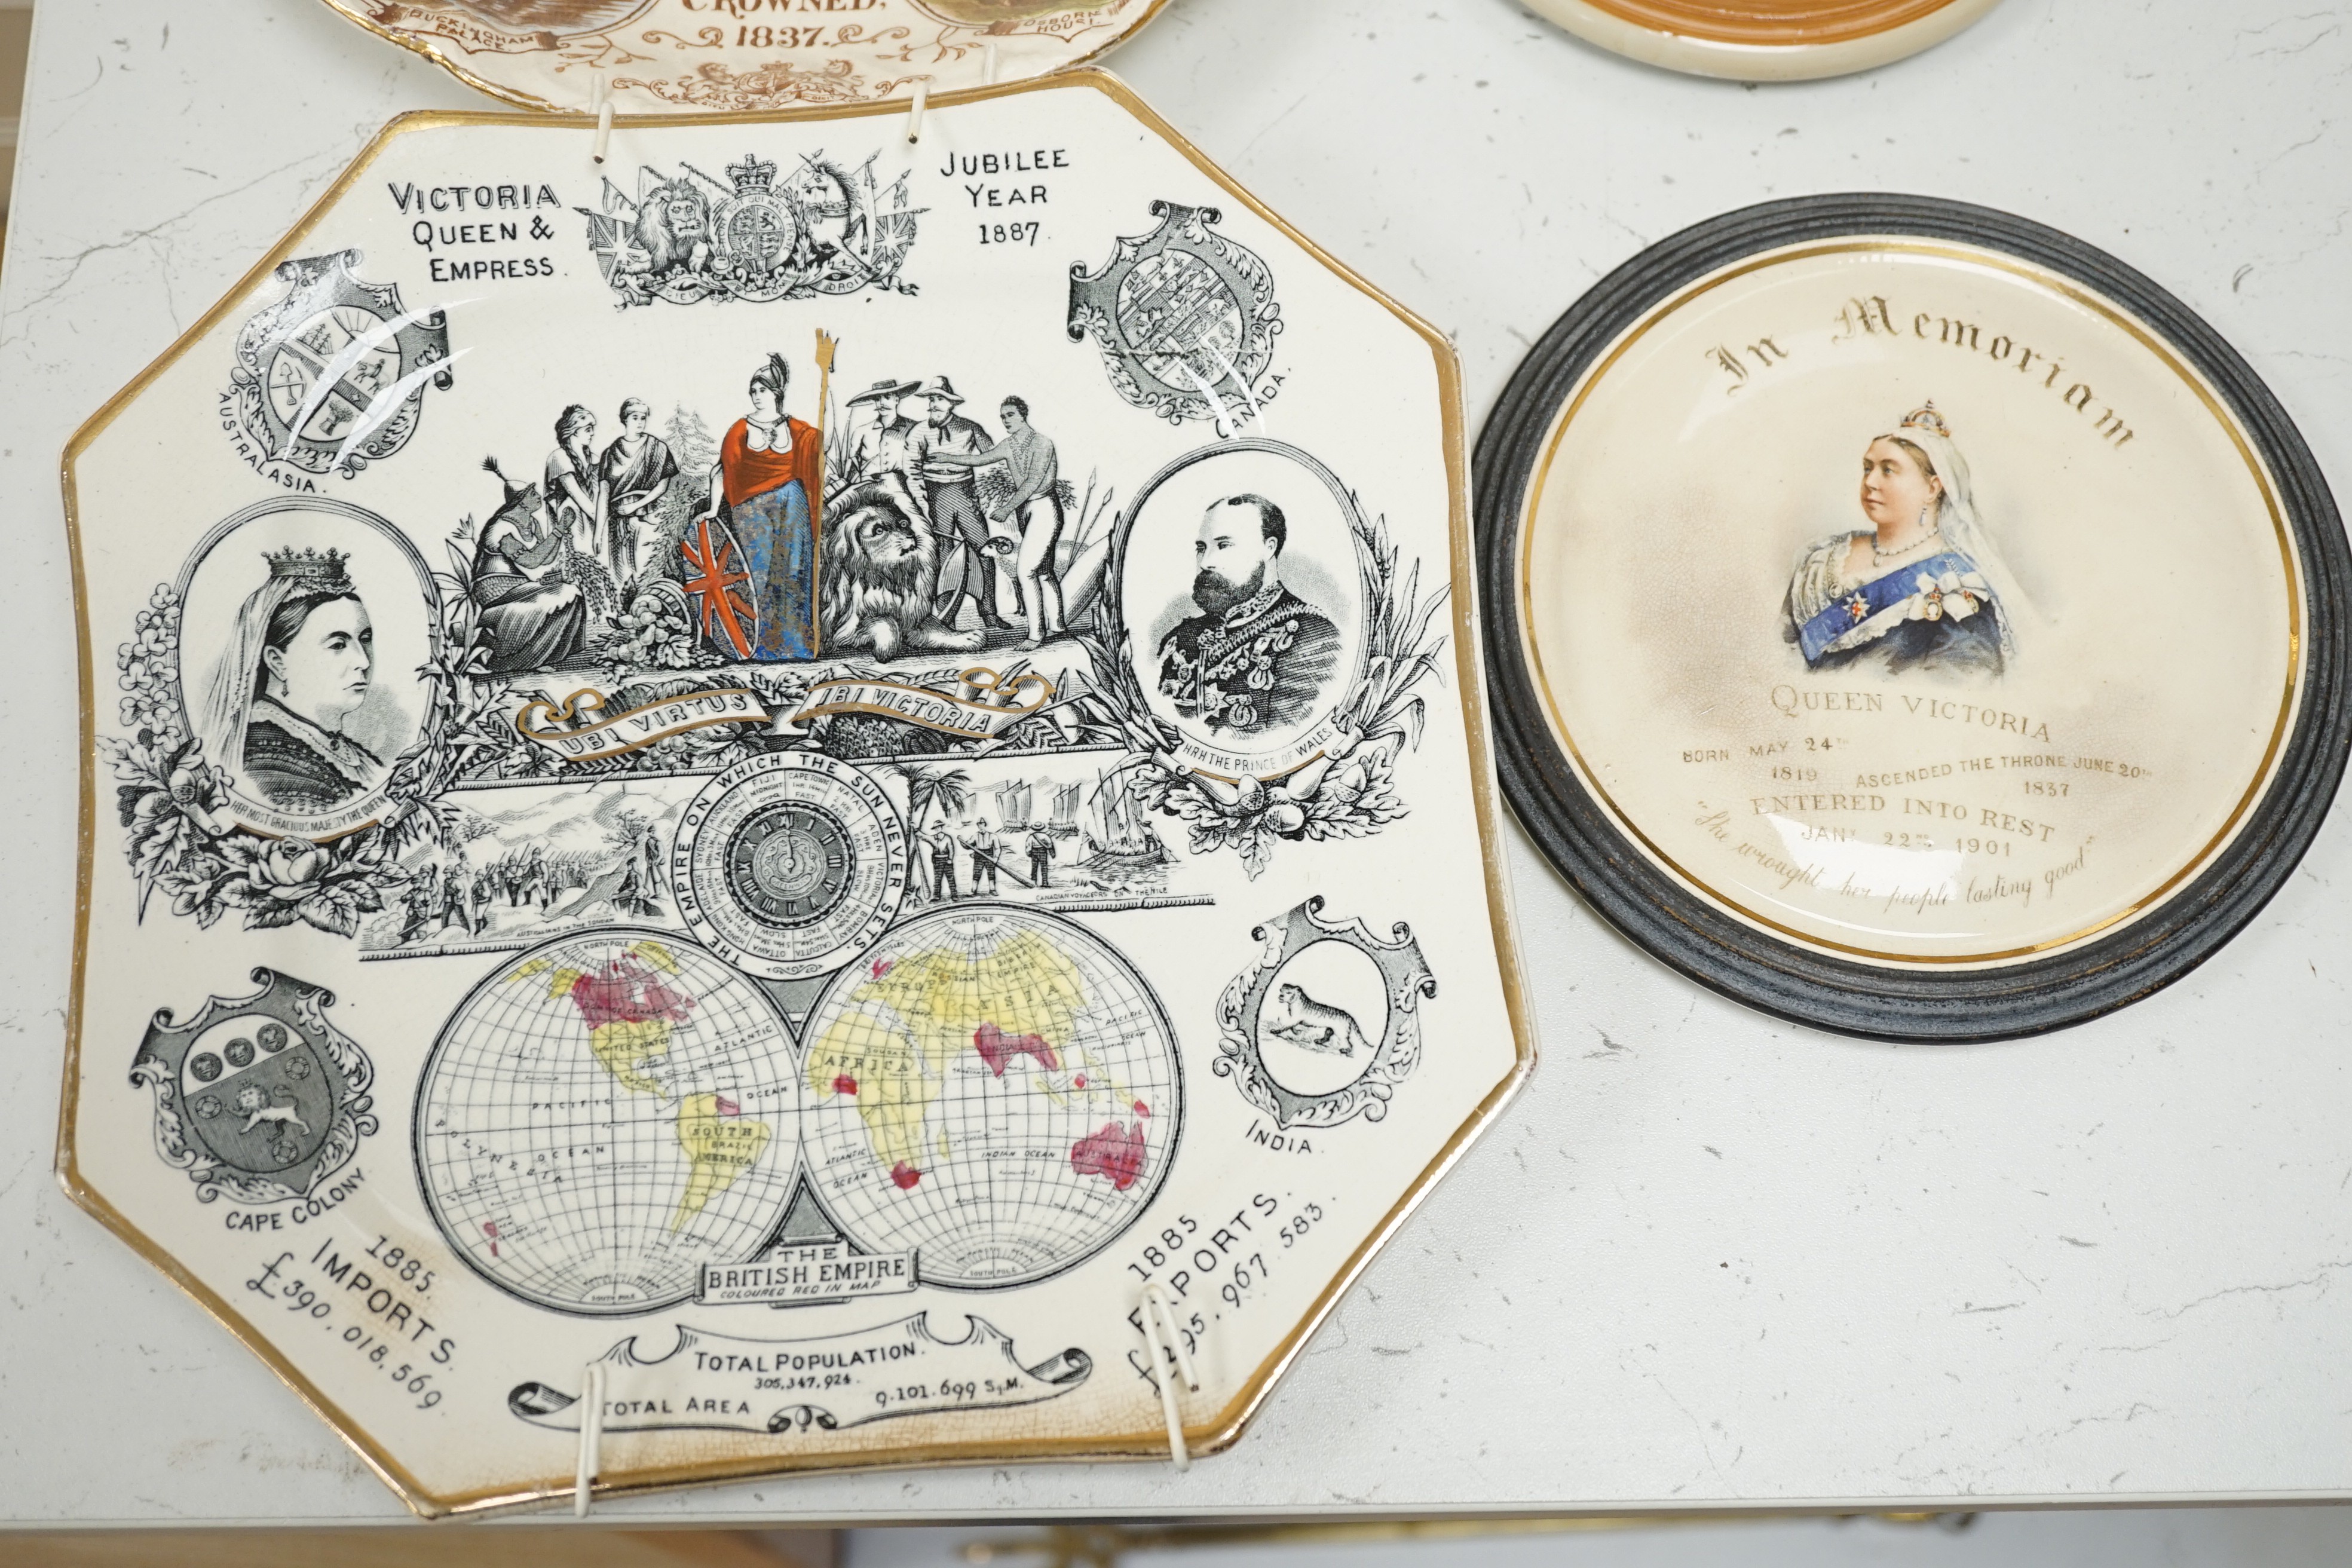 A Queen Victoria Balance of Payments plate, a memoriam plaque an 1897 Diamond Jubilee plate and a Diamond Jubilee procession chromolithograph